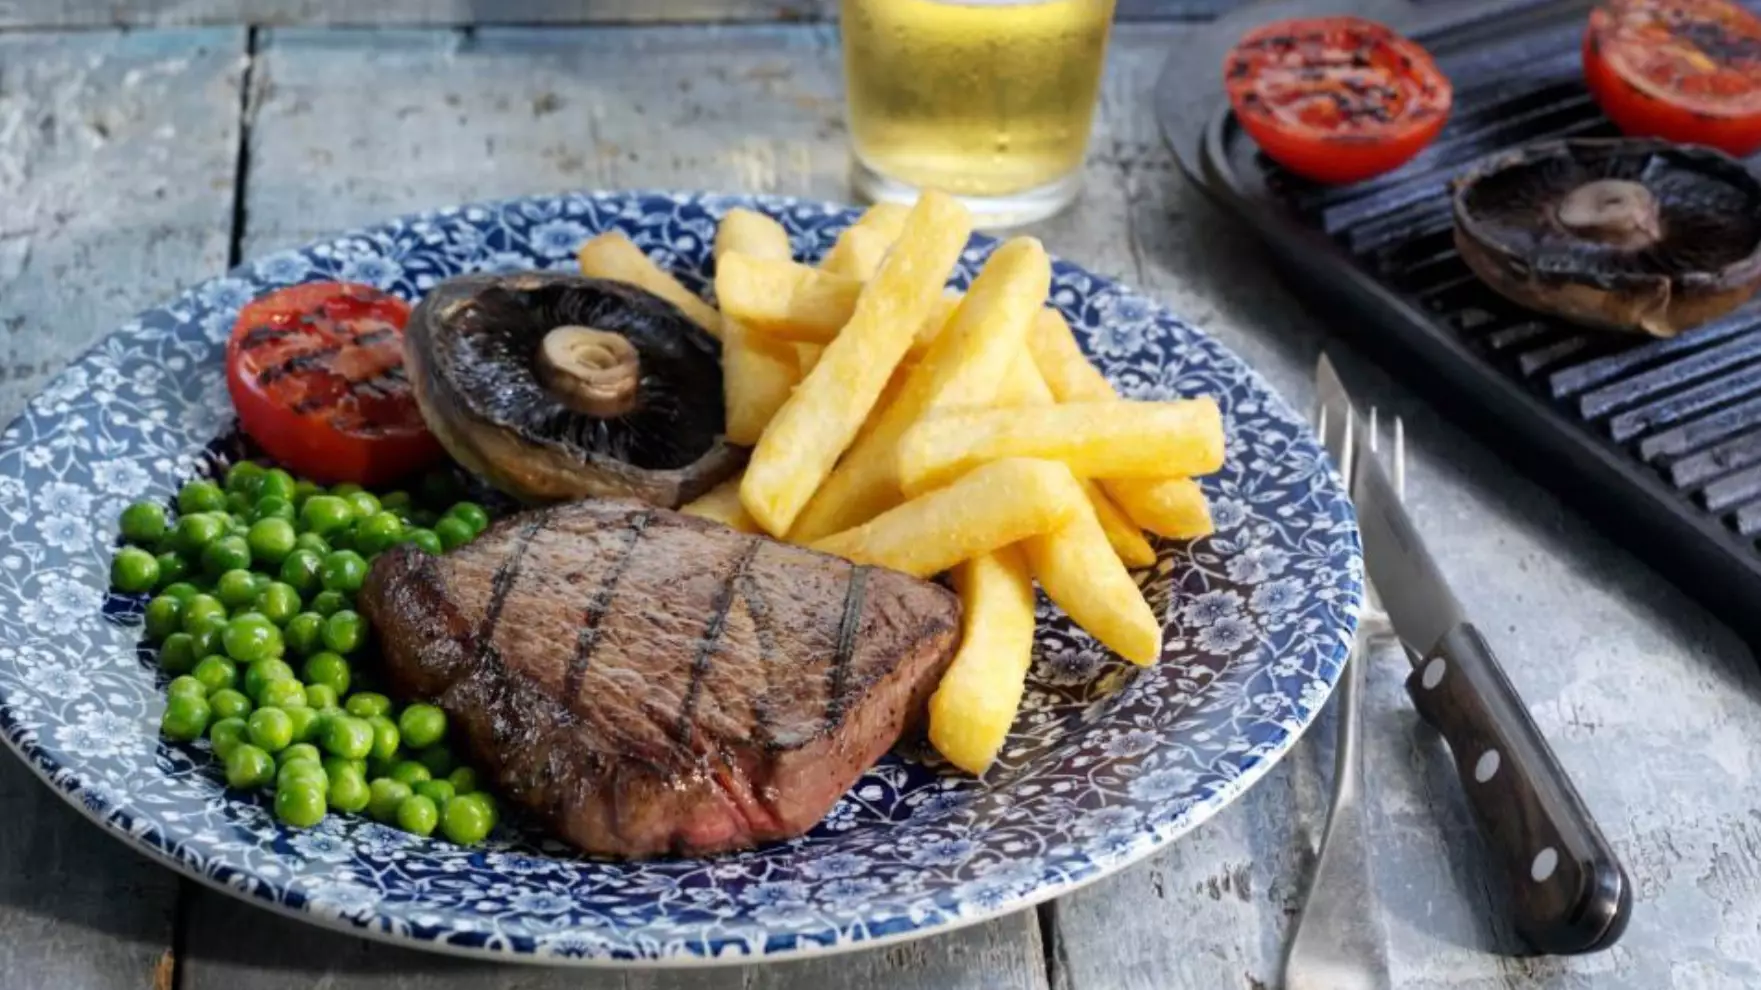 Get A Slap-Up Valentine's Day Meal At Wetherspoons For Just £20